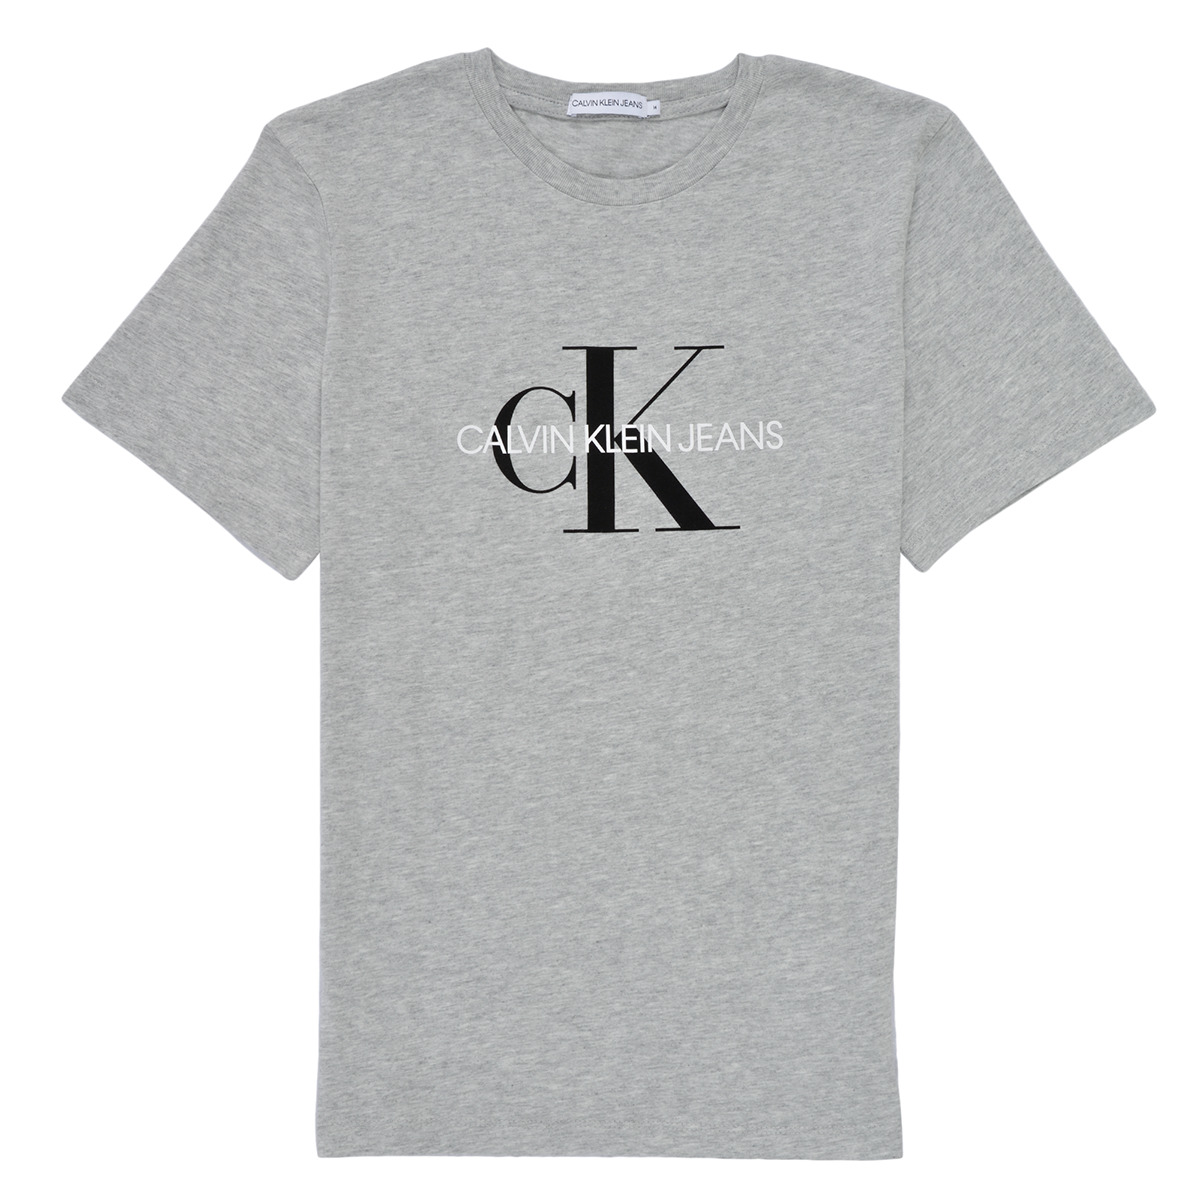 Calvin Klein Jeans MONOGRAM Grey Europe Fast - short-sleeved Child delivery 30,40 € Spartoo ! t-shirts | - Clothing